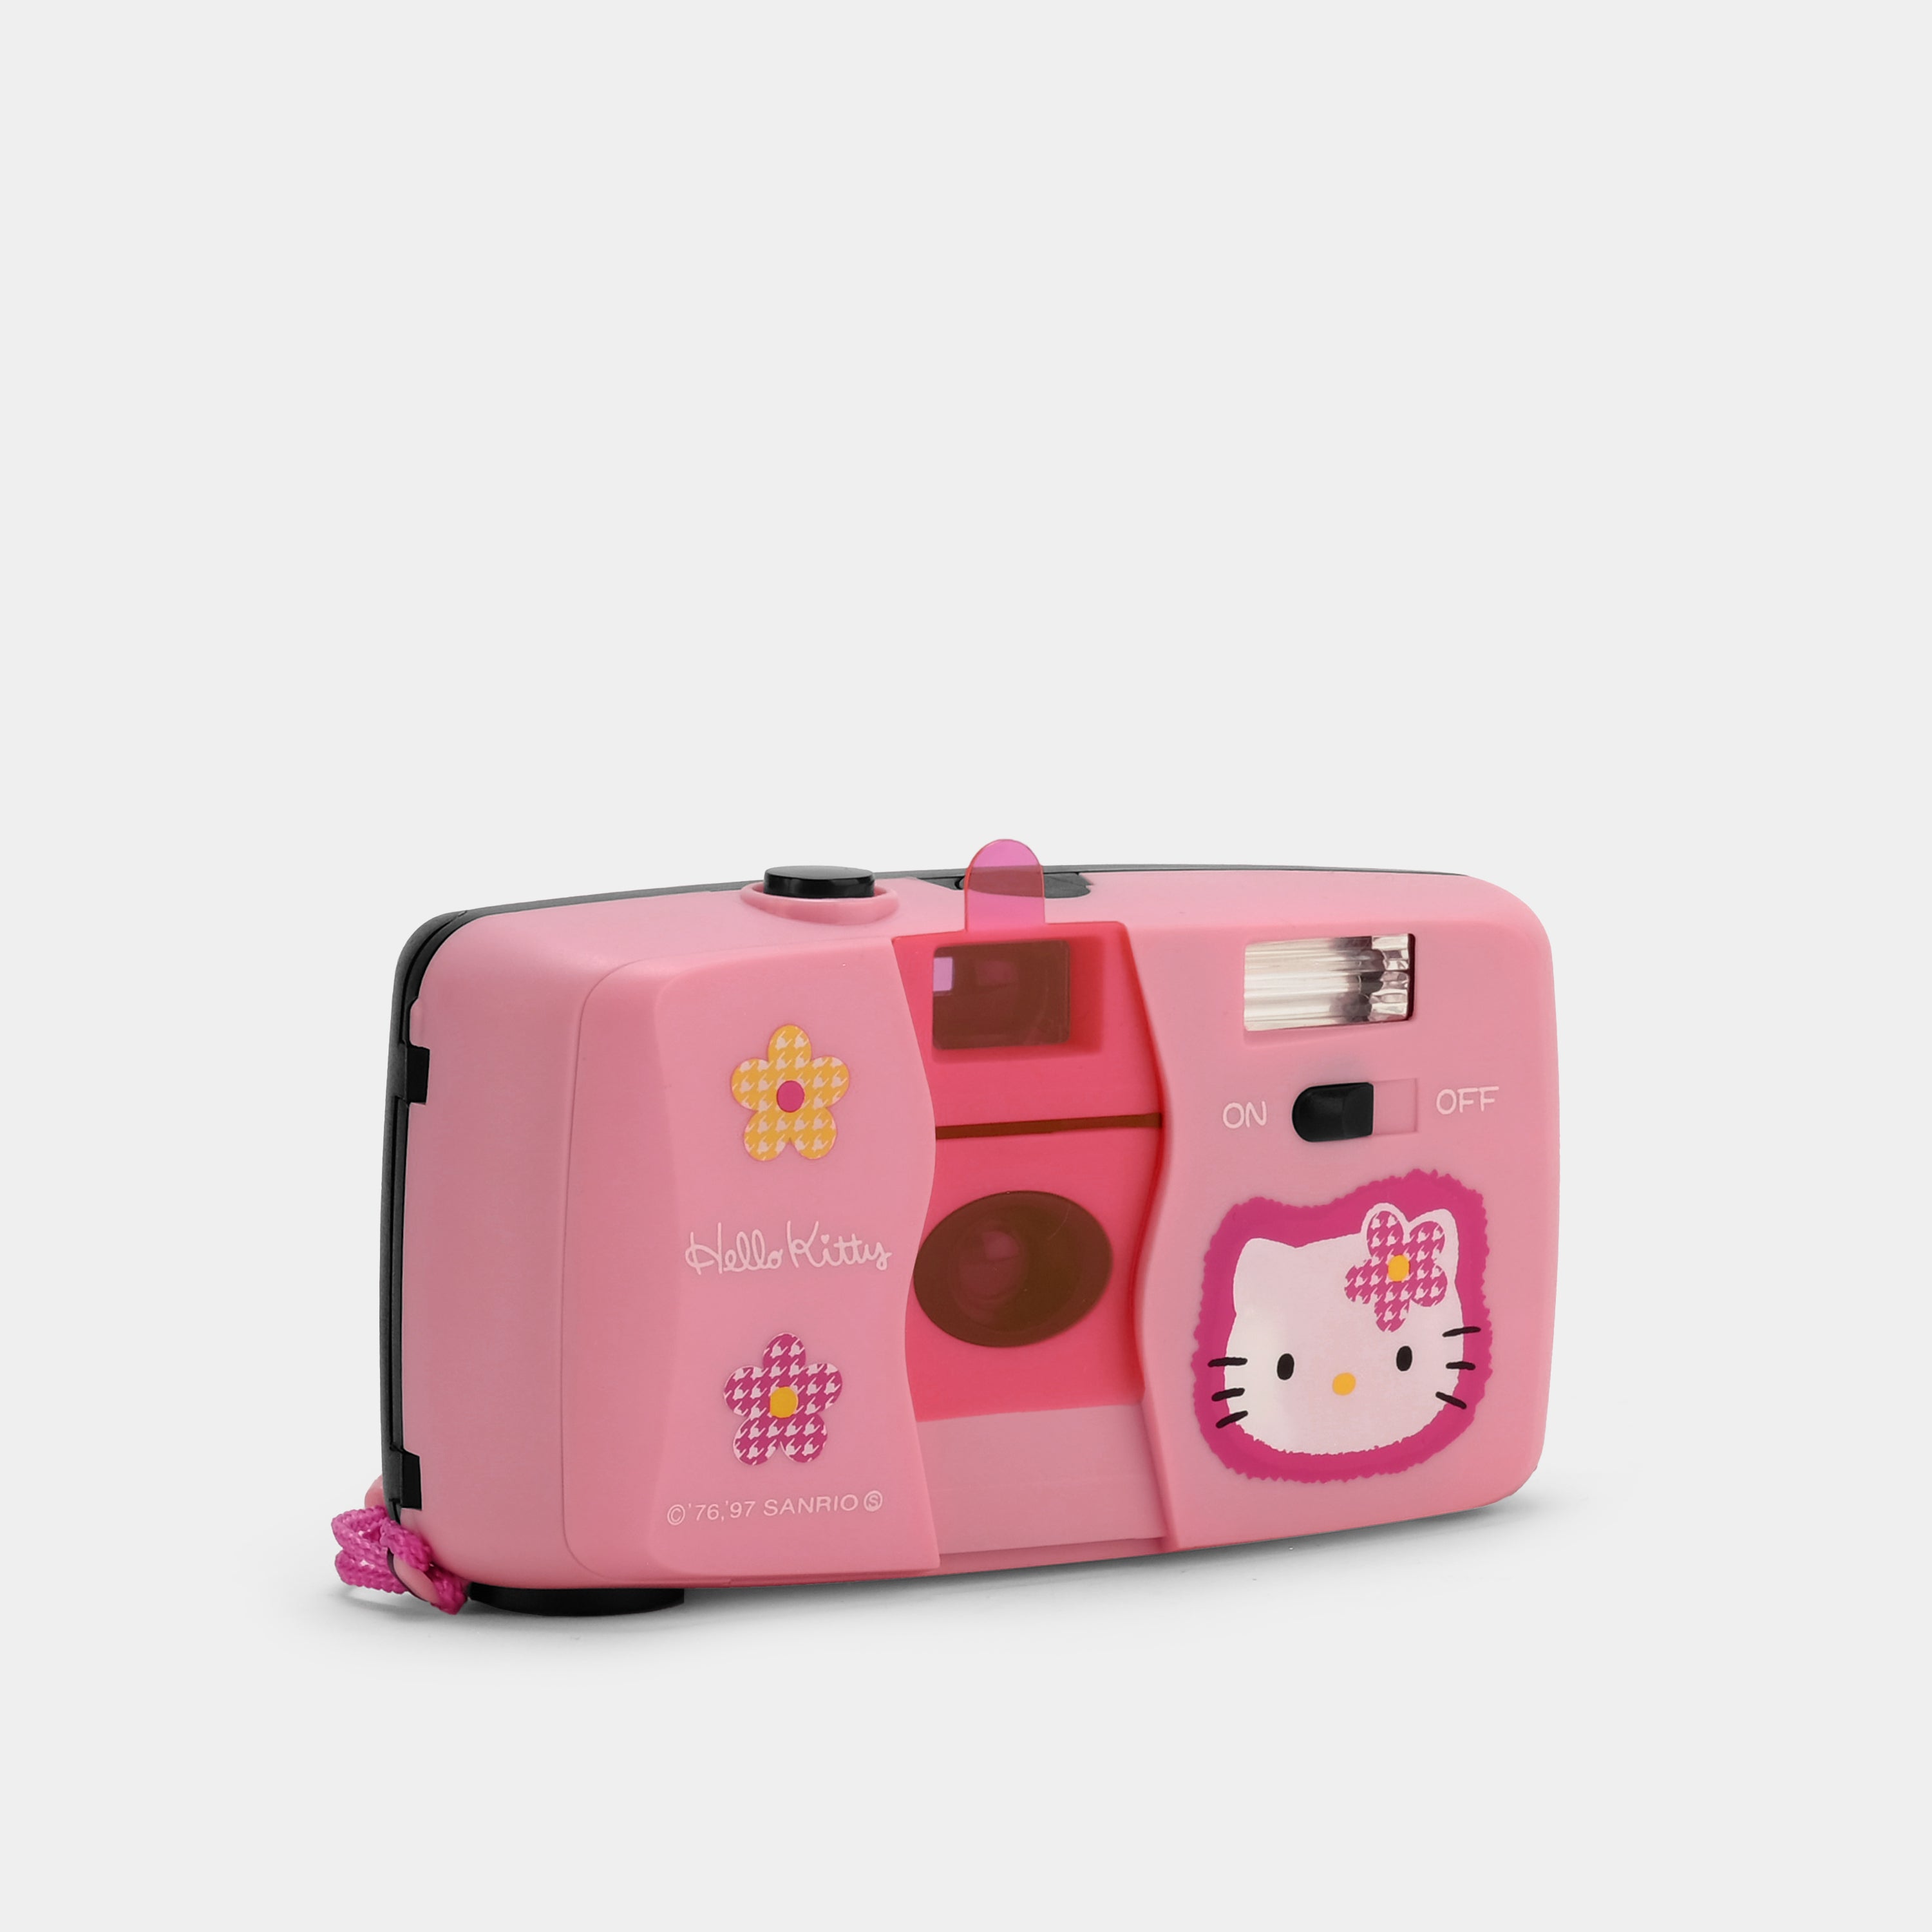 Hello Kitty Pink 35mm Point and Shoot Film Camera with Filter Kit